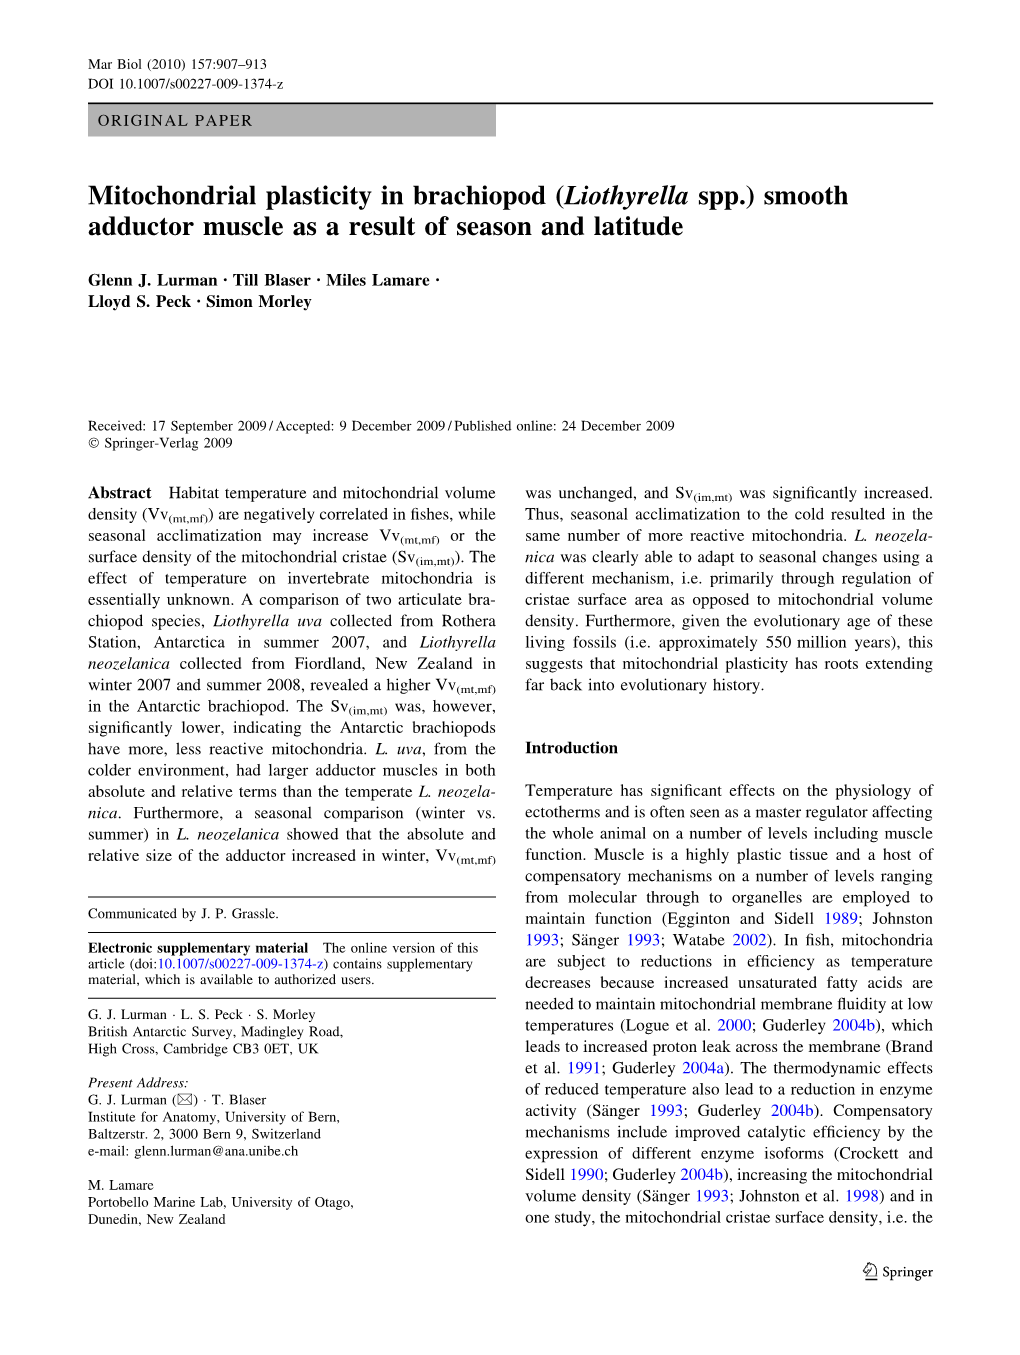 Mitochondrial Plasticity in Brachiopod (Liothyrella Spp.) Smooth Adductor Muscle As a Result of Season and Latitude